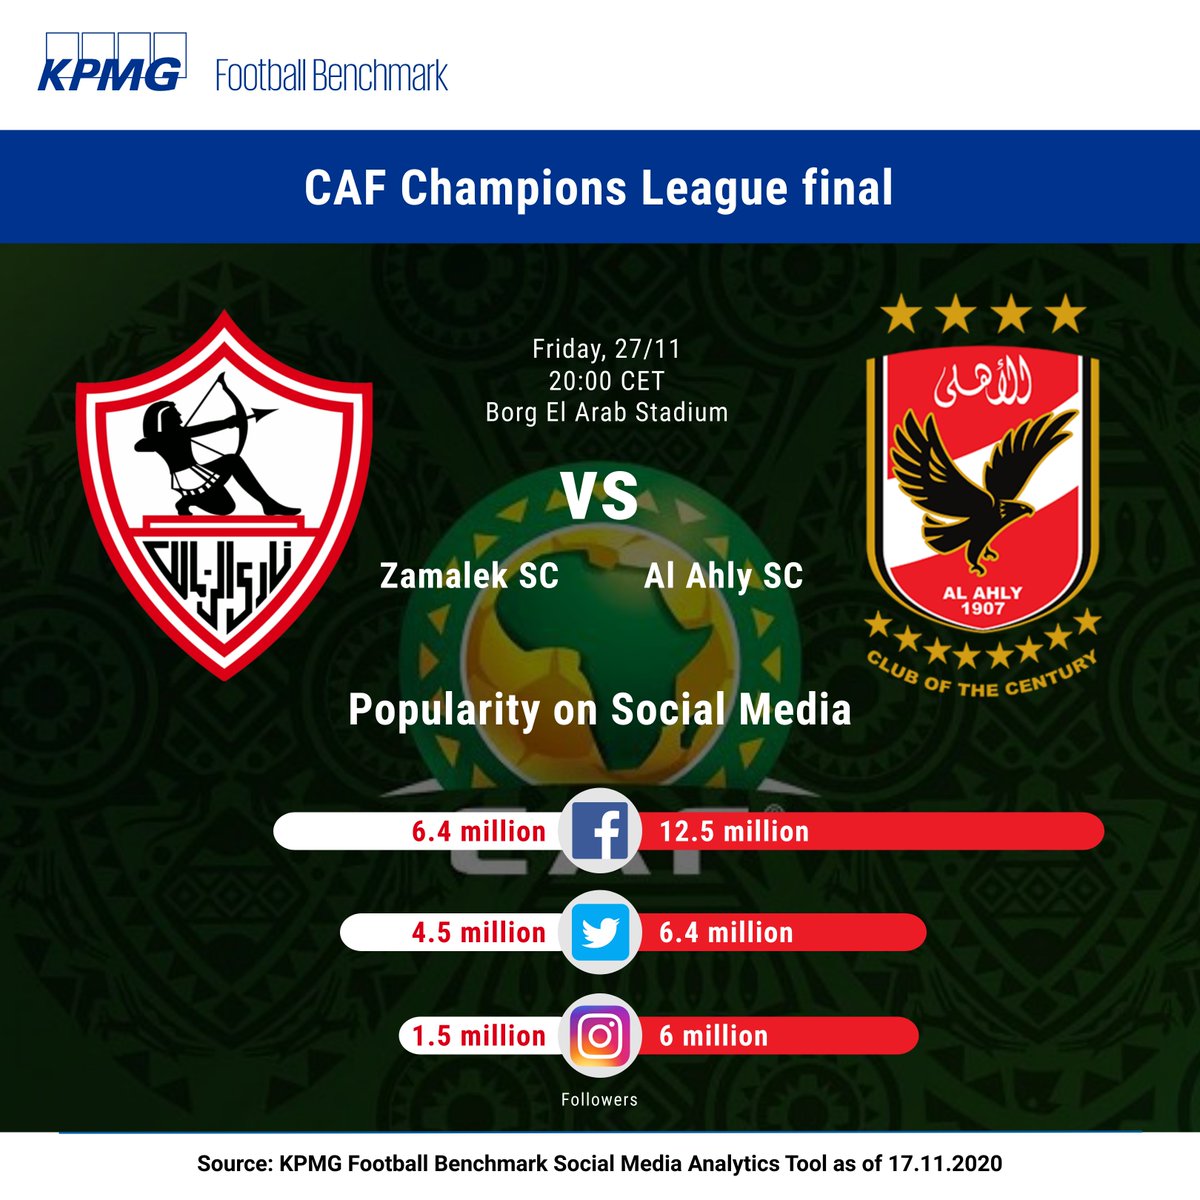 Kpmg Football Benchmark 8 Times Caf Cl Title Holder And Most Decorated Club Of Egypt Al Ahly Boast A Slightly Larger Online Followership Zamalek 5 Caf Cl Titles On The Other